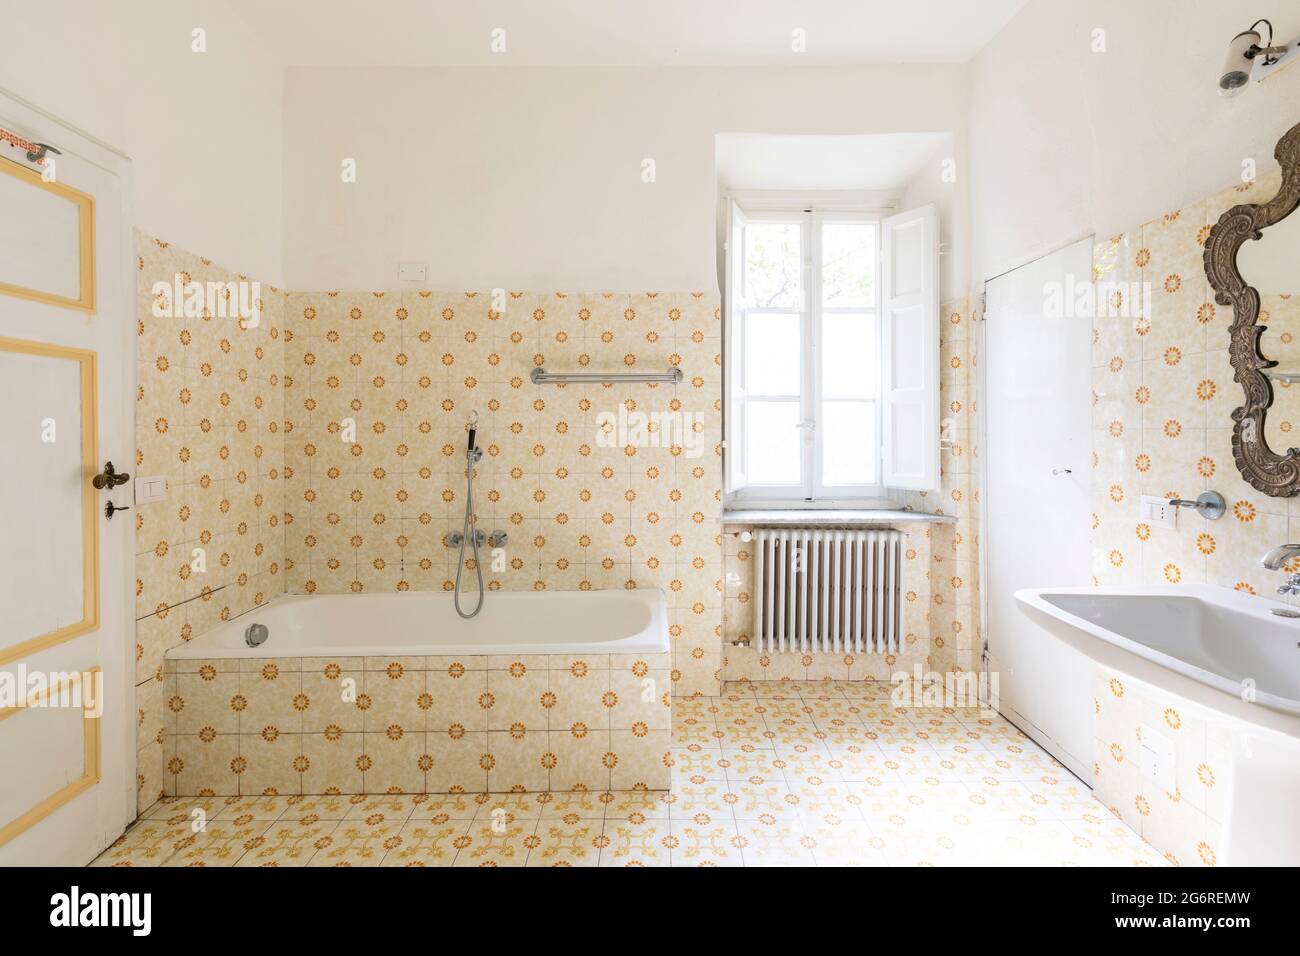 Interior of an old bathroom with window and bathtub. Stock Photo